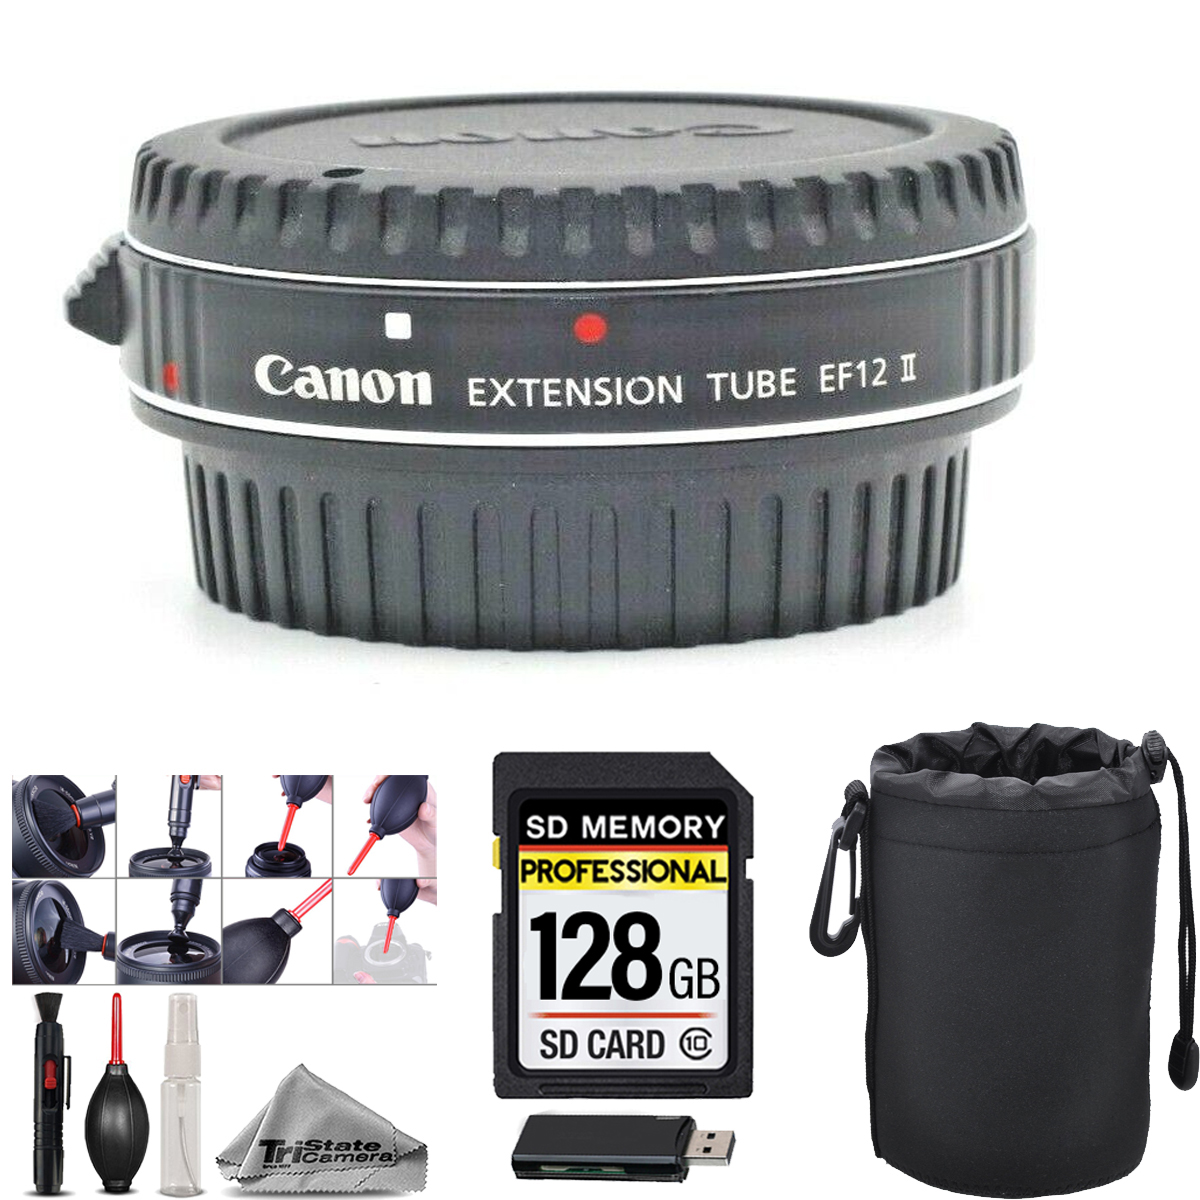 Extension Tube EF 12 II + Lens Pouch + Cleaning Kit + Card Reader + 128GB *FREE SHIPPING*